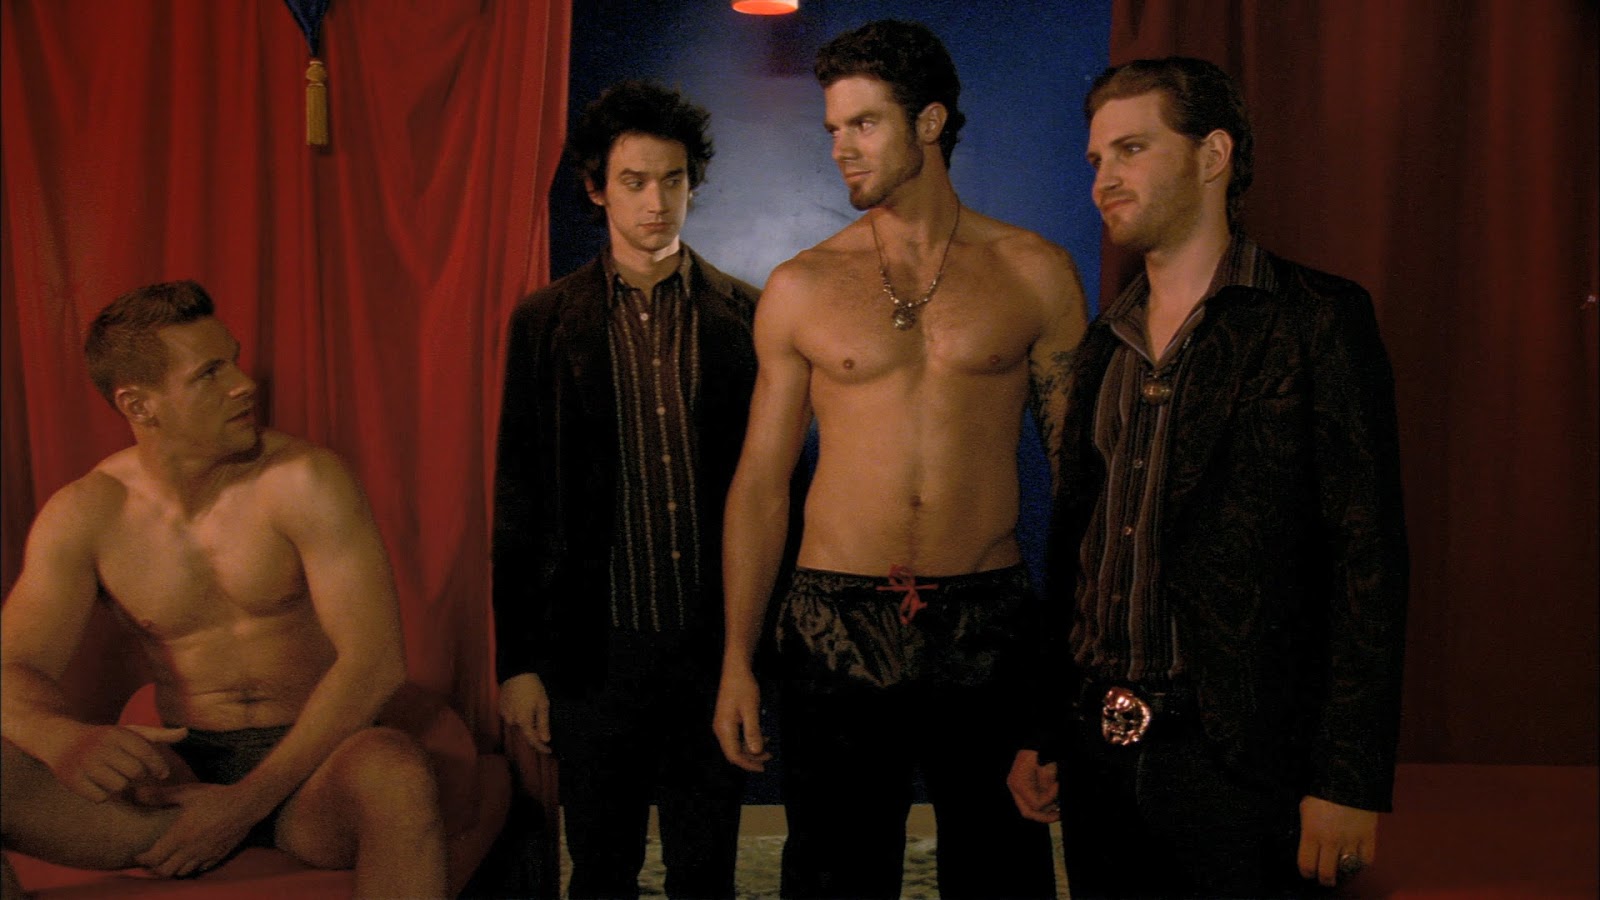 Michael Von Steel & Extras in The Lair S01E03.